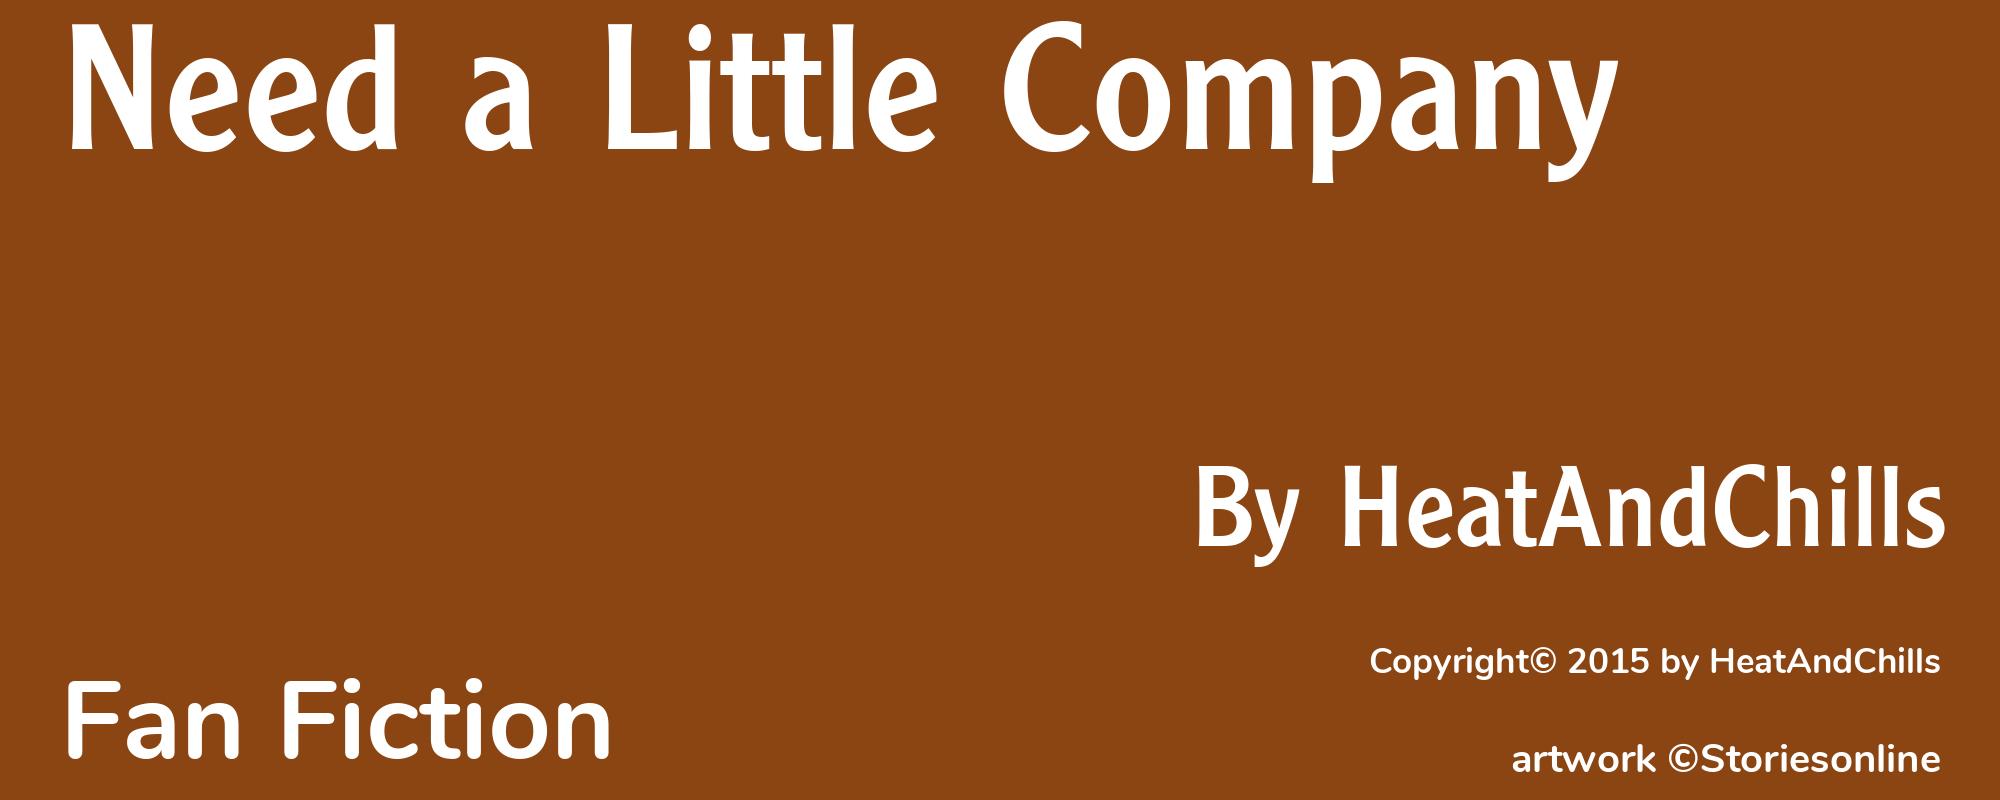 Need a Little Company - Cover